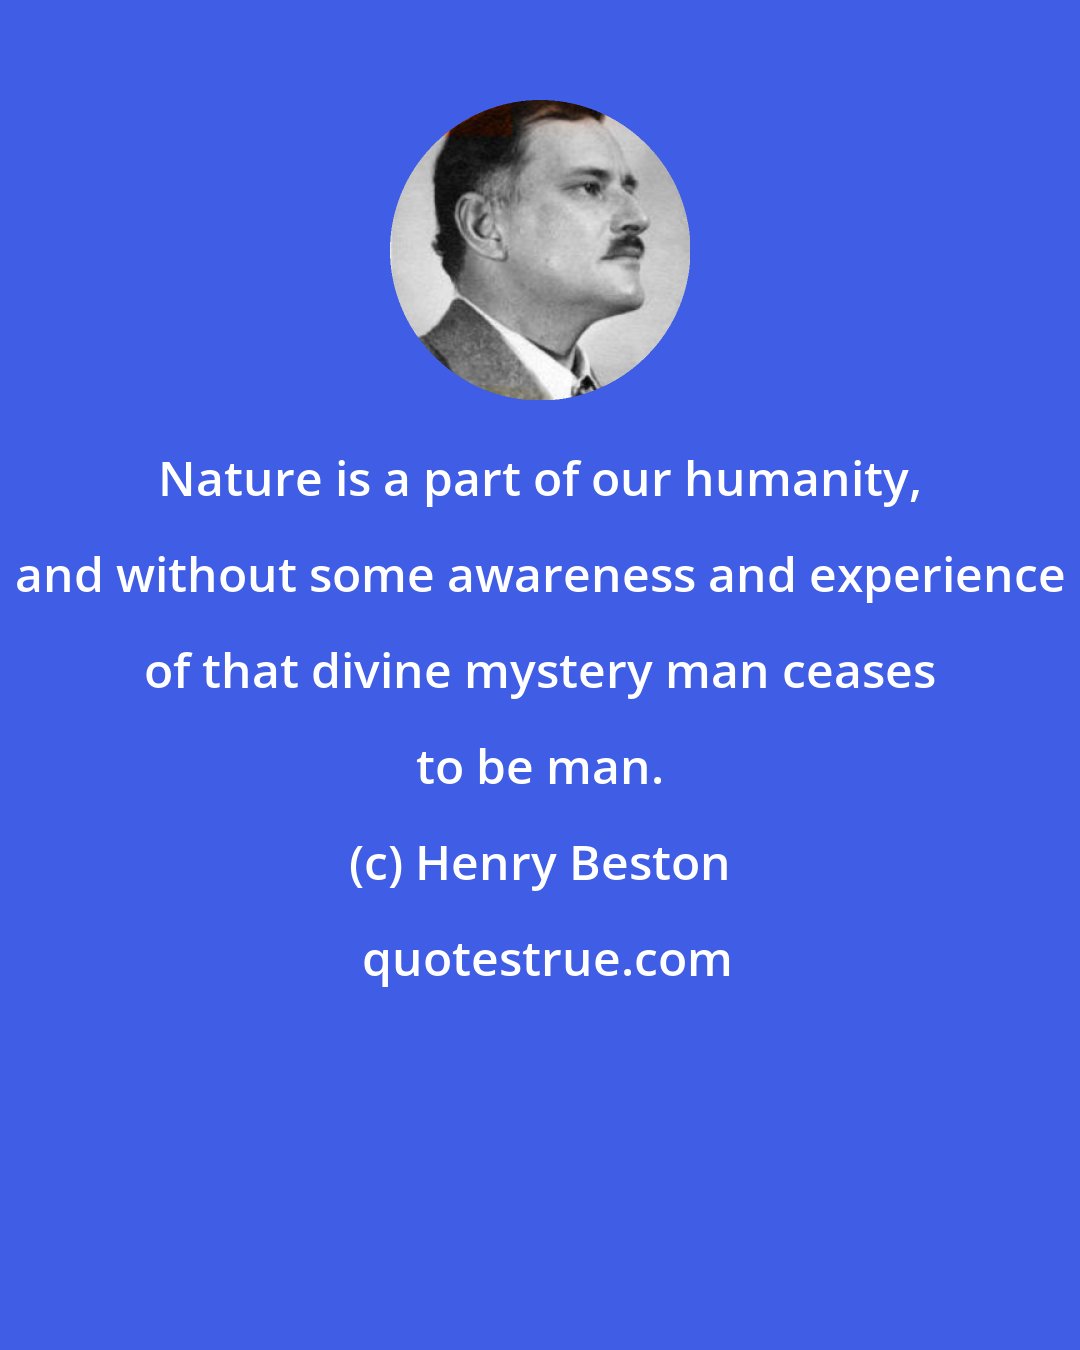 Henry Beston: Nature is a part of our humanity, and without some awareness and experience of that divine mystery man ceases to be man.